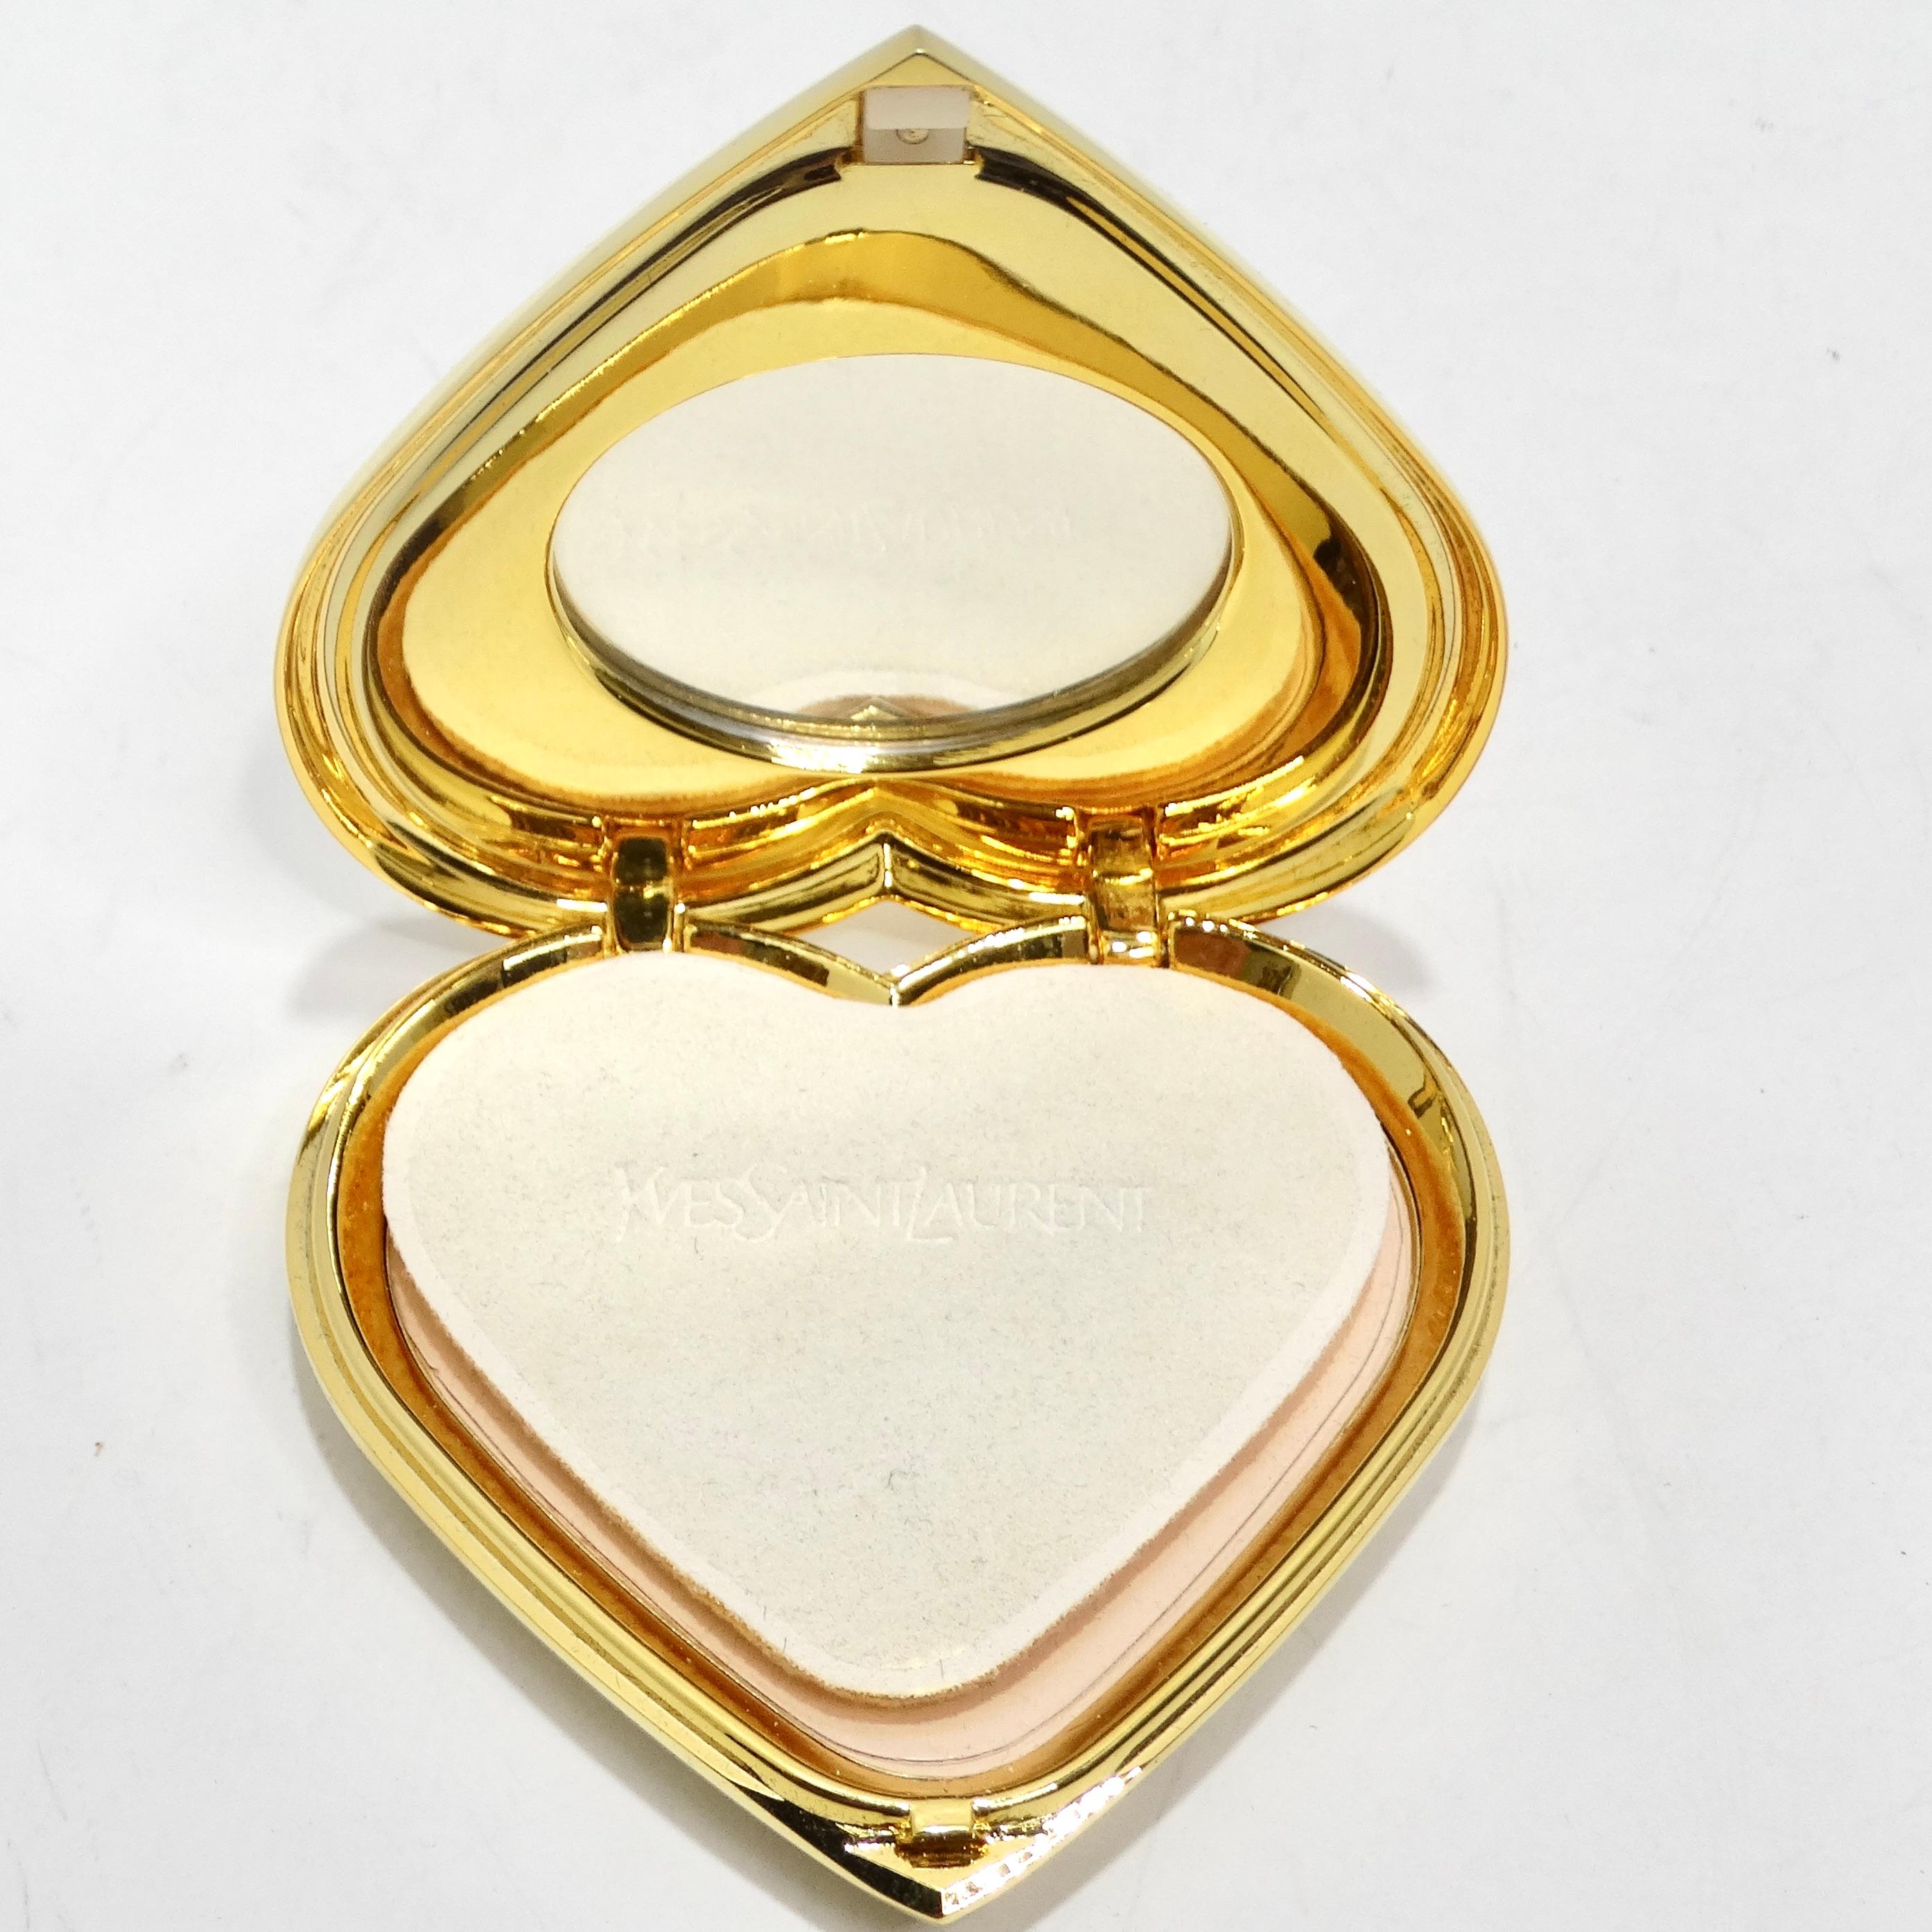 Yves Saint Laurent 1980s Gem Encrusted Heart Shaped Compact Mirror For Sale 2